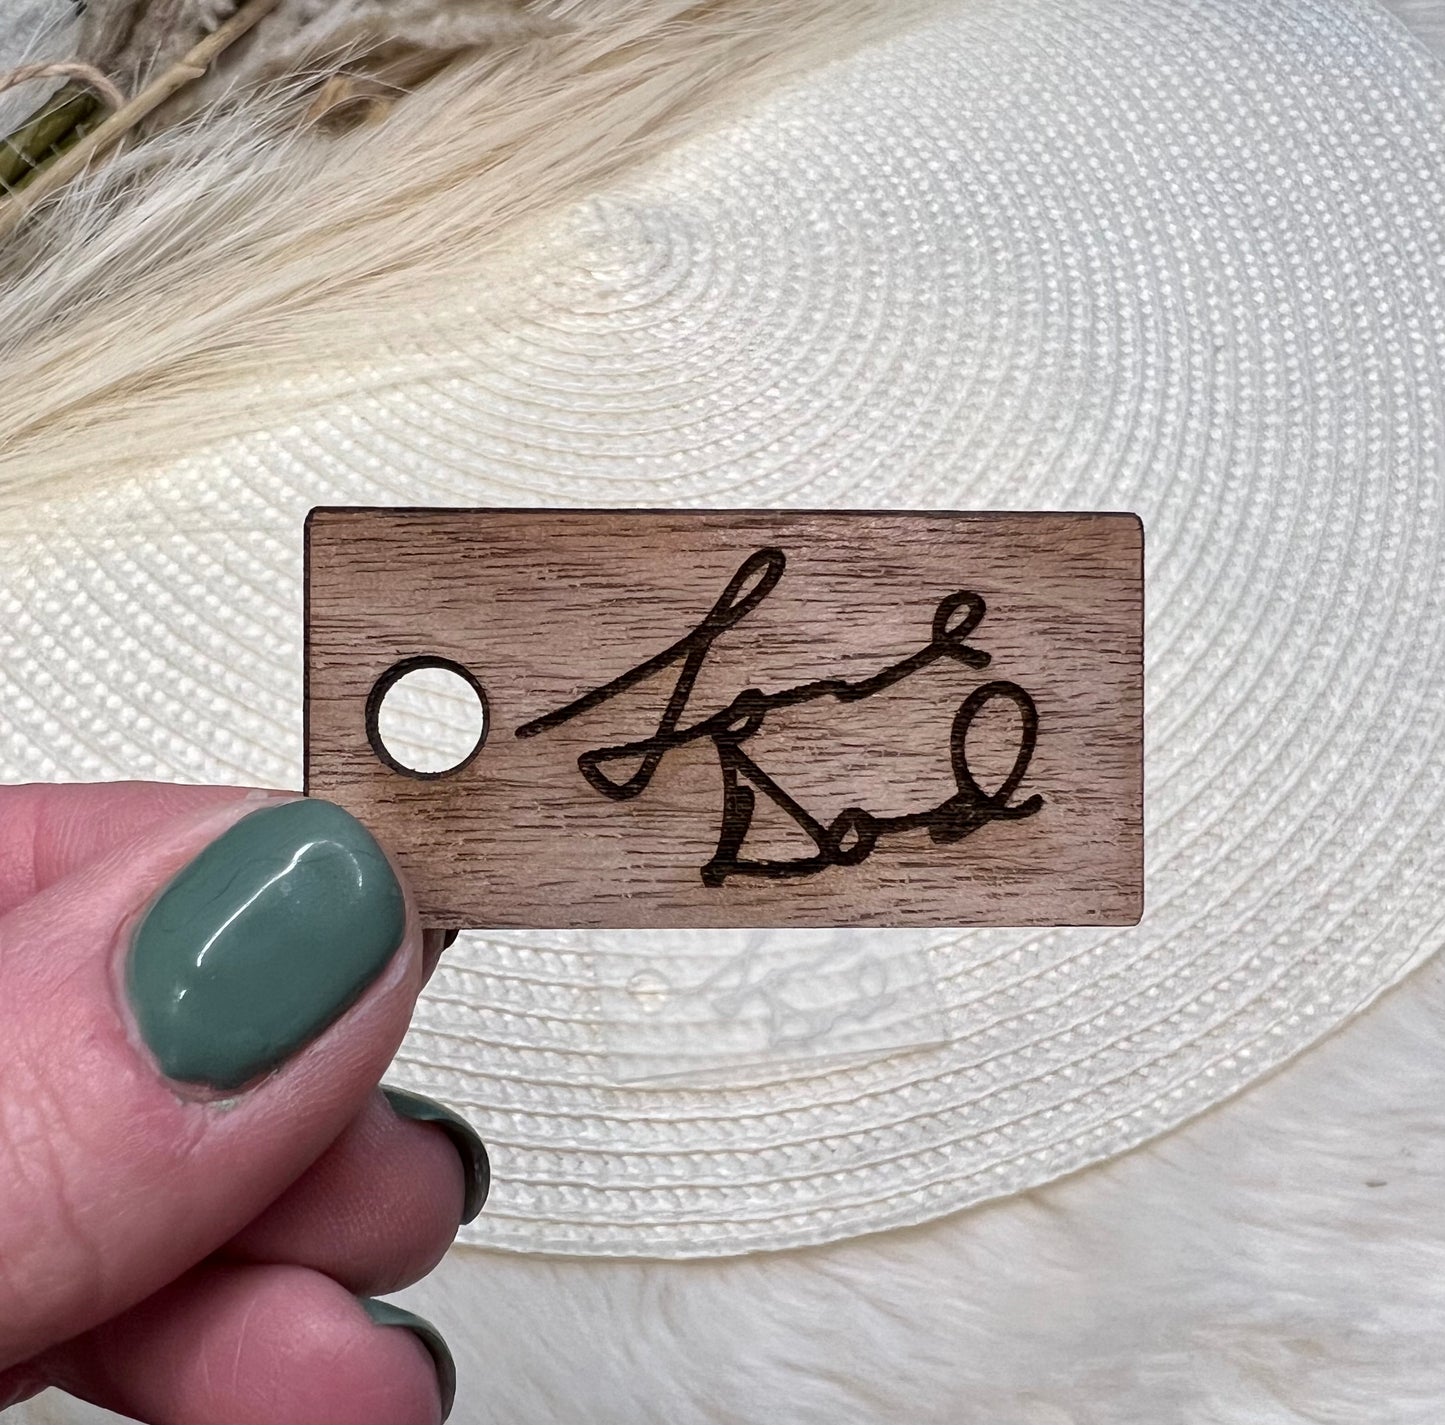 Keychain with traced handwriting.